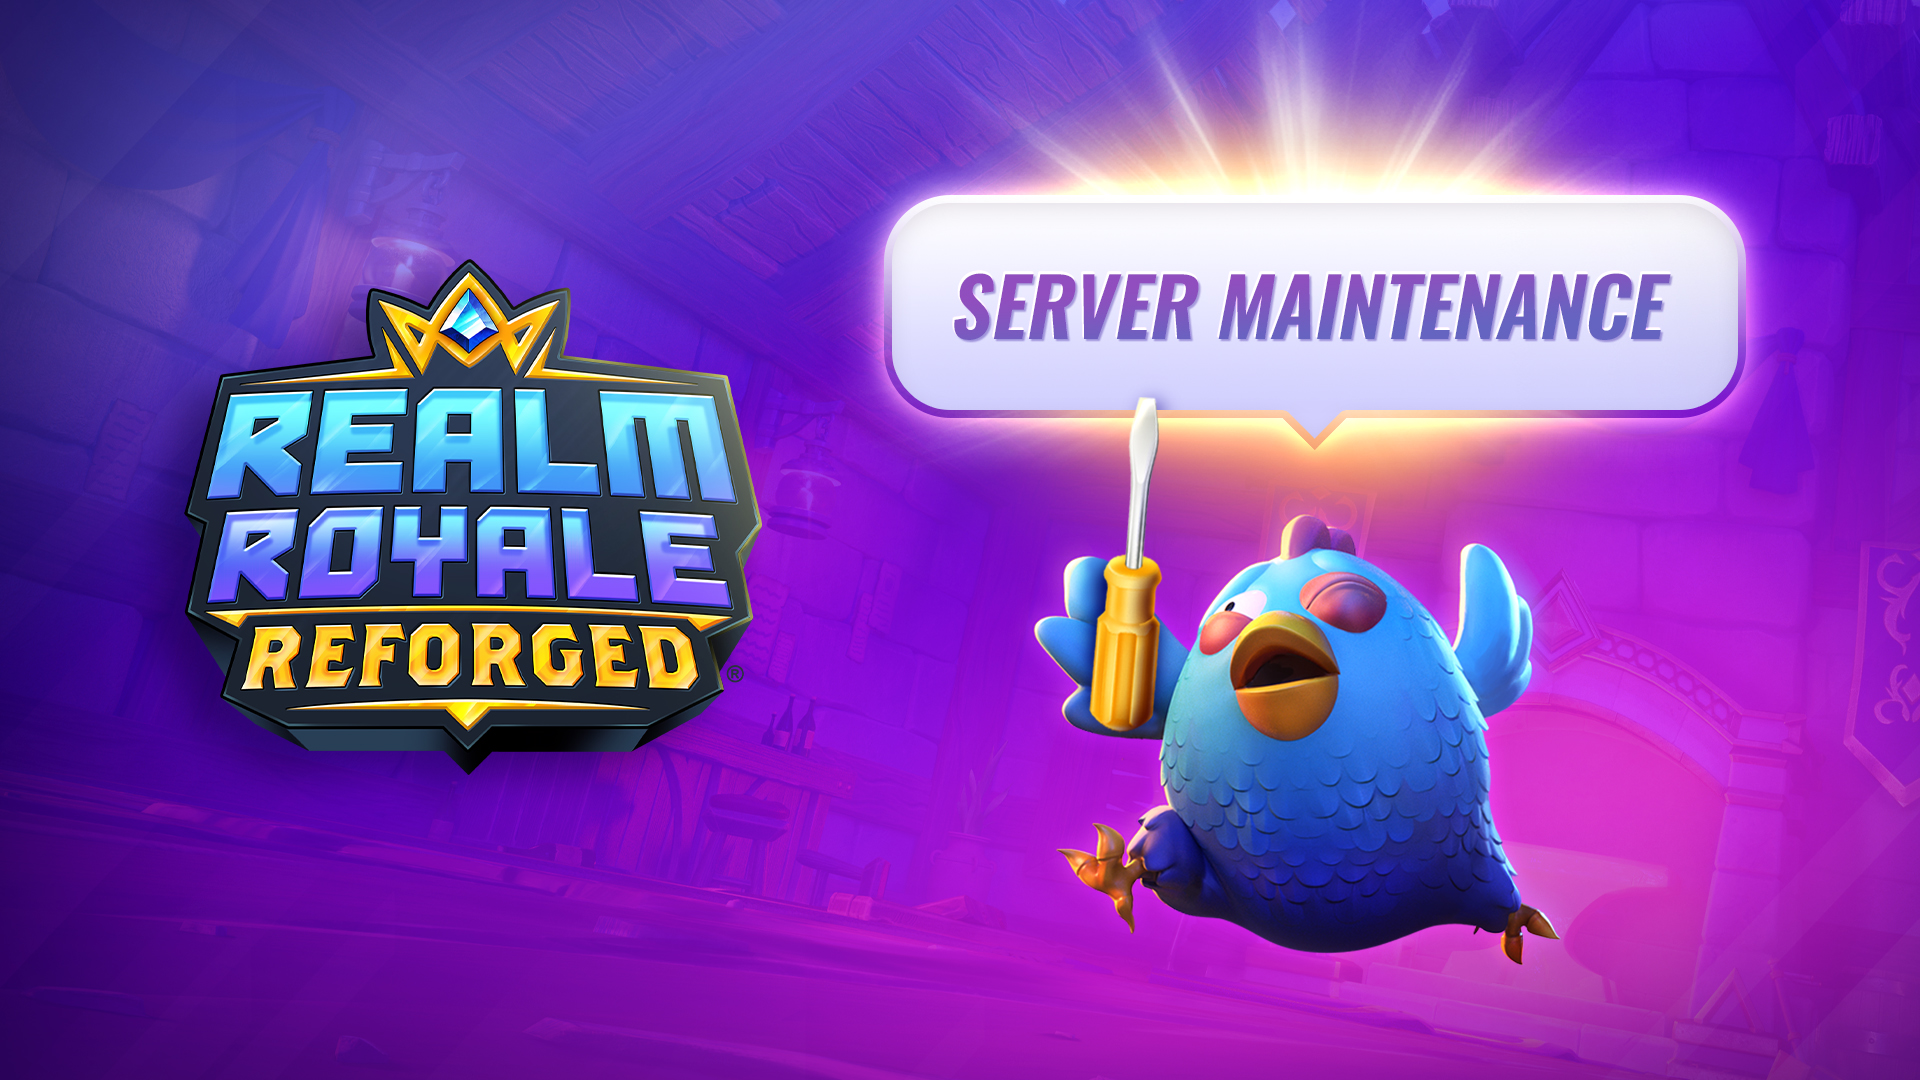 Realm Royale Reforged on X: "Heads up Realm fam! Tomorrow servers will be  coming down at 5:30am ET for some general maintenance. We estimate a couple  hours of downtime. Be sure to